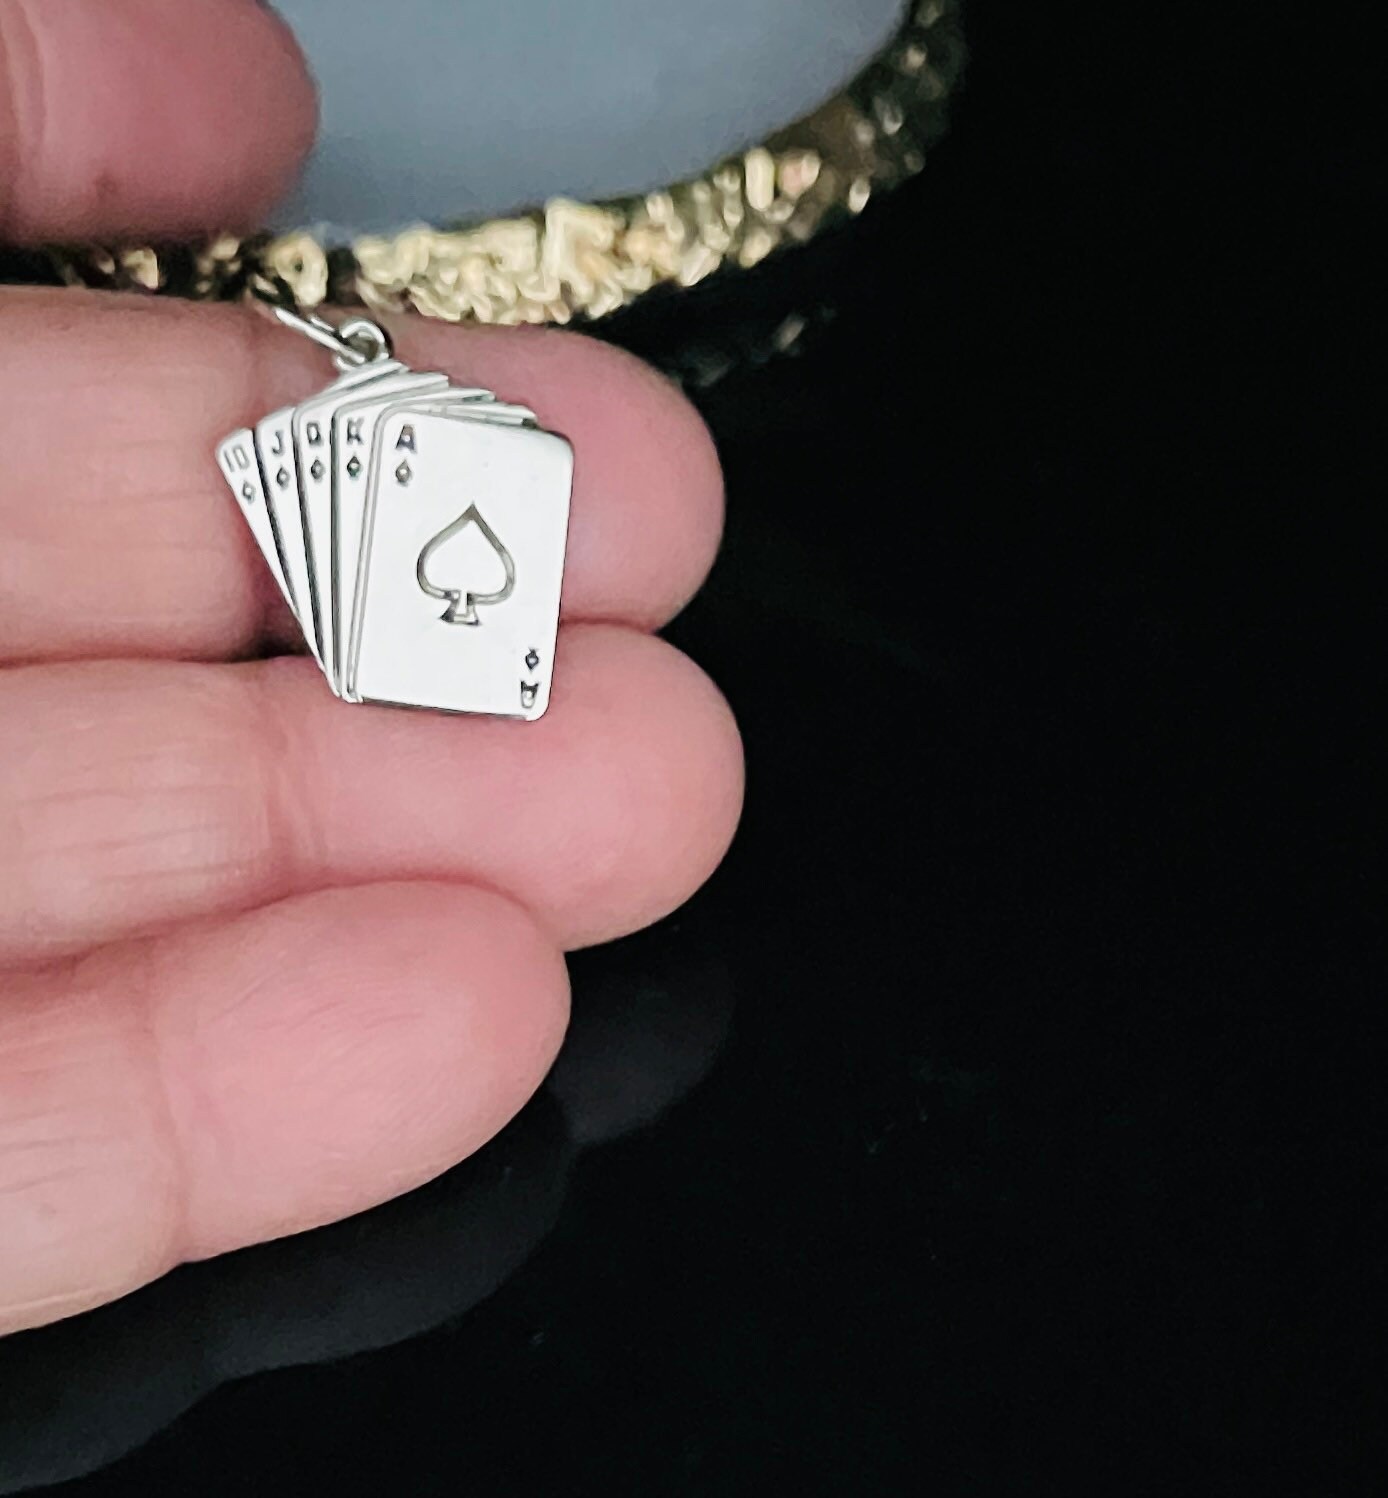 Flush Card Deck Shape Charm in Solid 14K Gold / Gift /Unisex/Necklace/Pendant /Christmas/Birthday/Graduation/Luckythumbnail